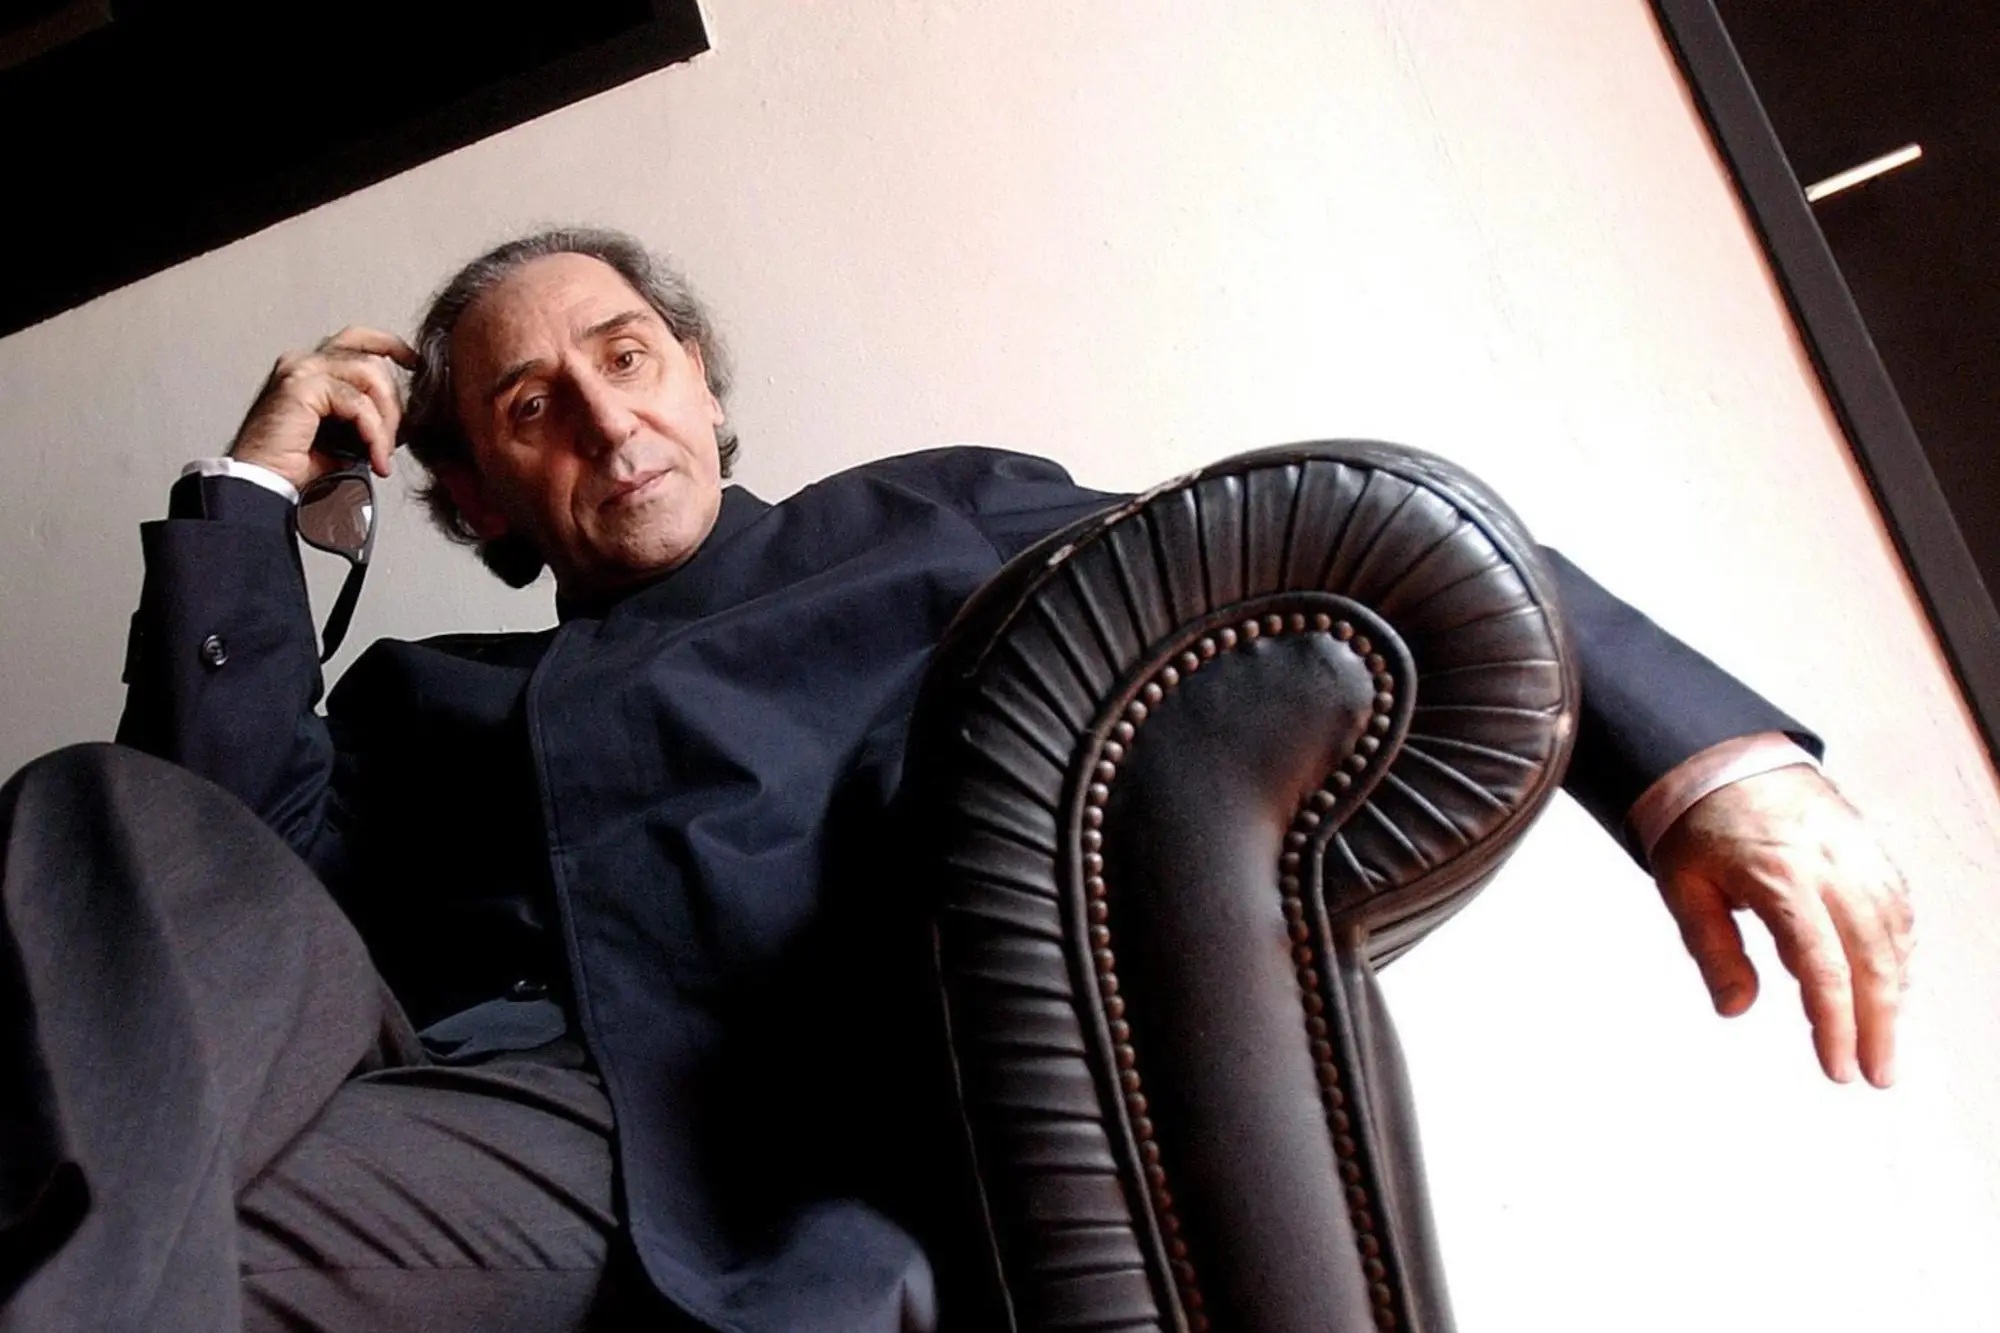 epa09207952 (FILE) - Italian singer and composer Franco Battiato poses during the presentation of his first film 'Perduto amor' in Barcelona, Spain, 23 April 2004 (reissued 18 May 2021). According to various media quoting his family, Battiato has passed away at his residence in Milo earlier in the day, aged 76.  EPA/ALBERTO ESTEVEZ